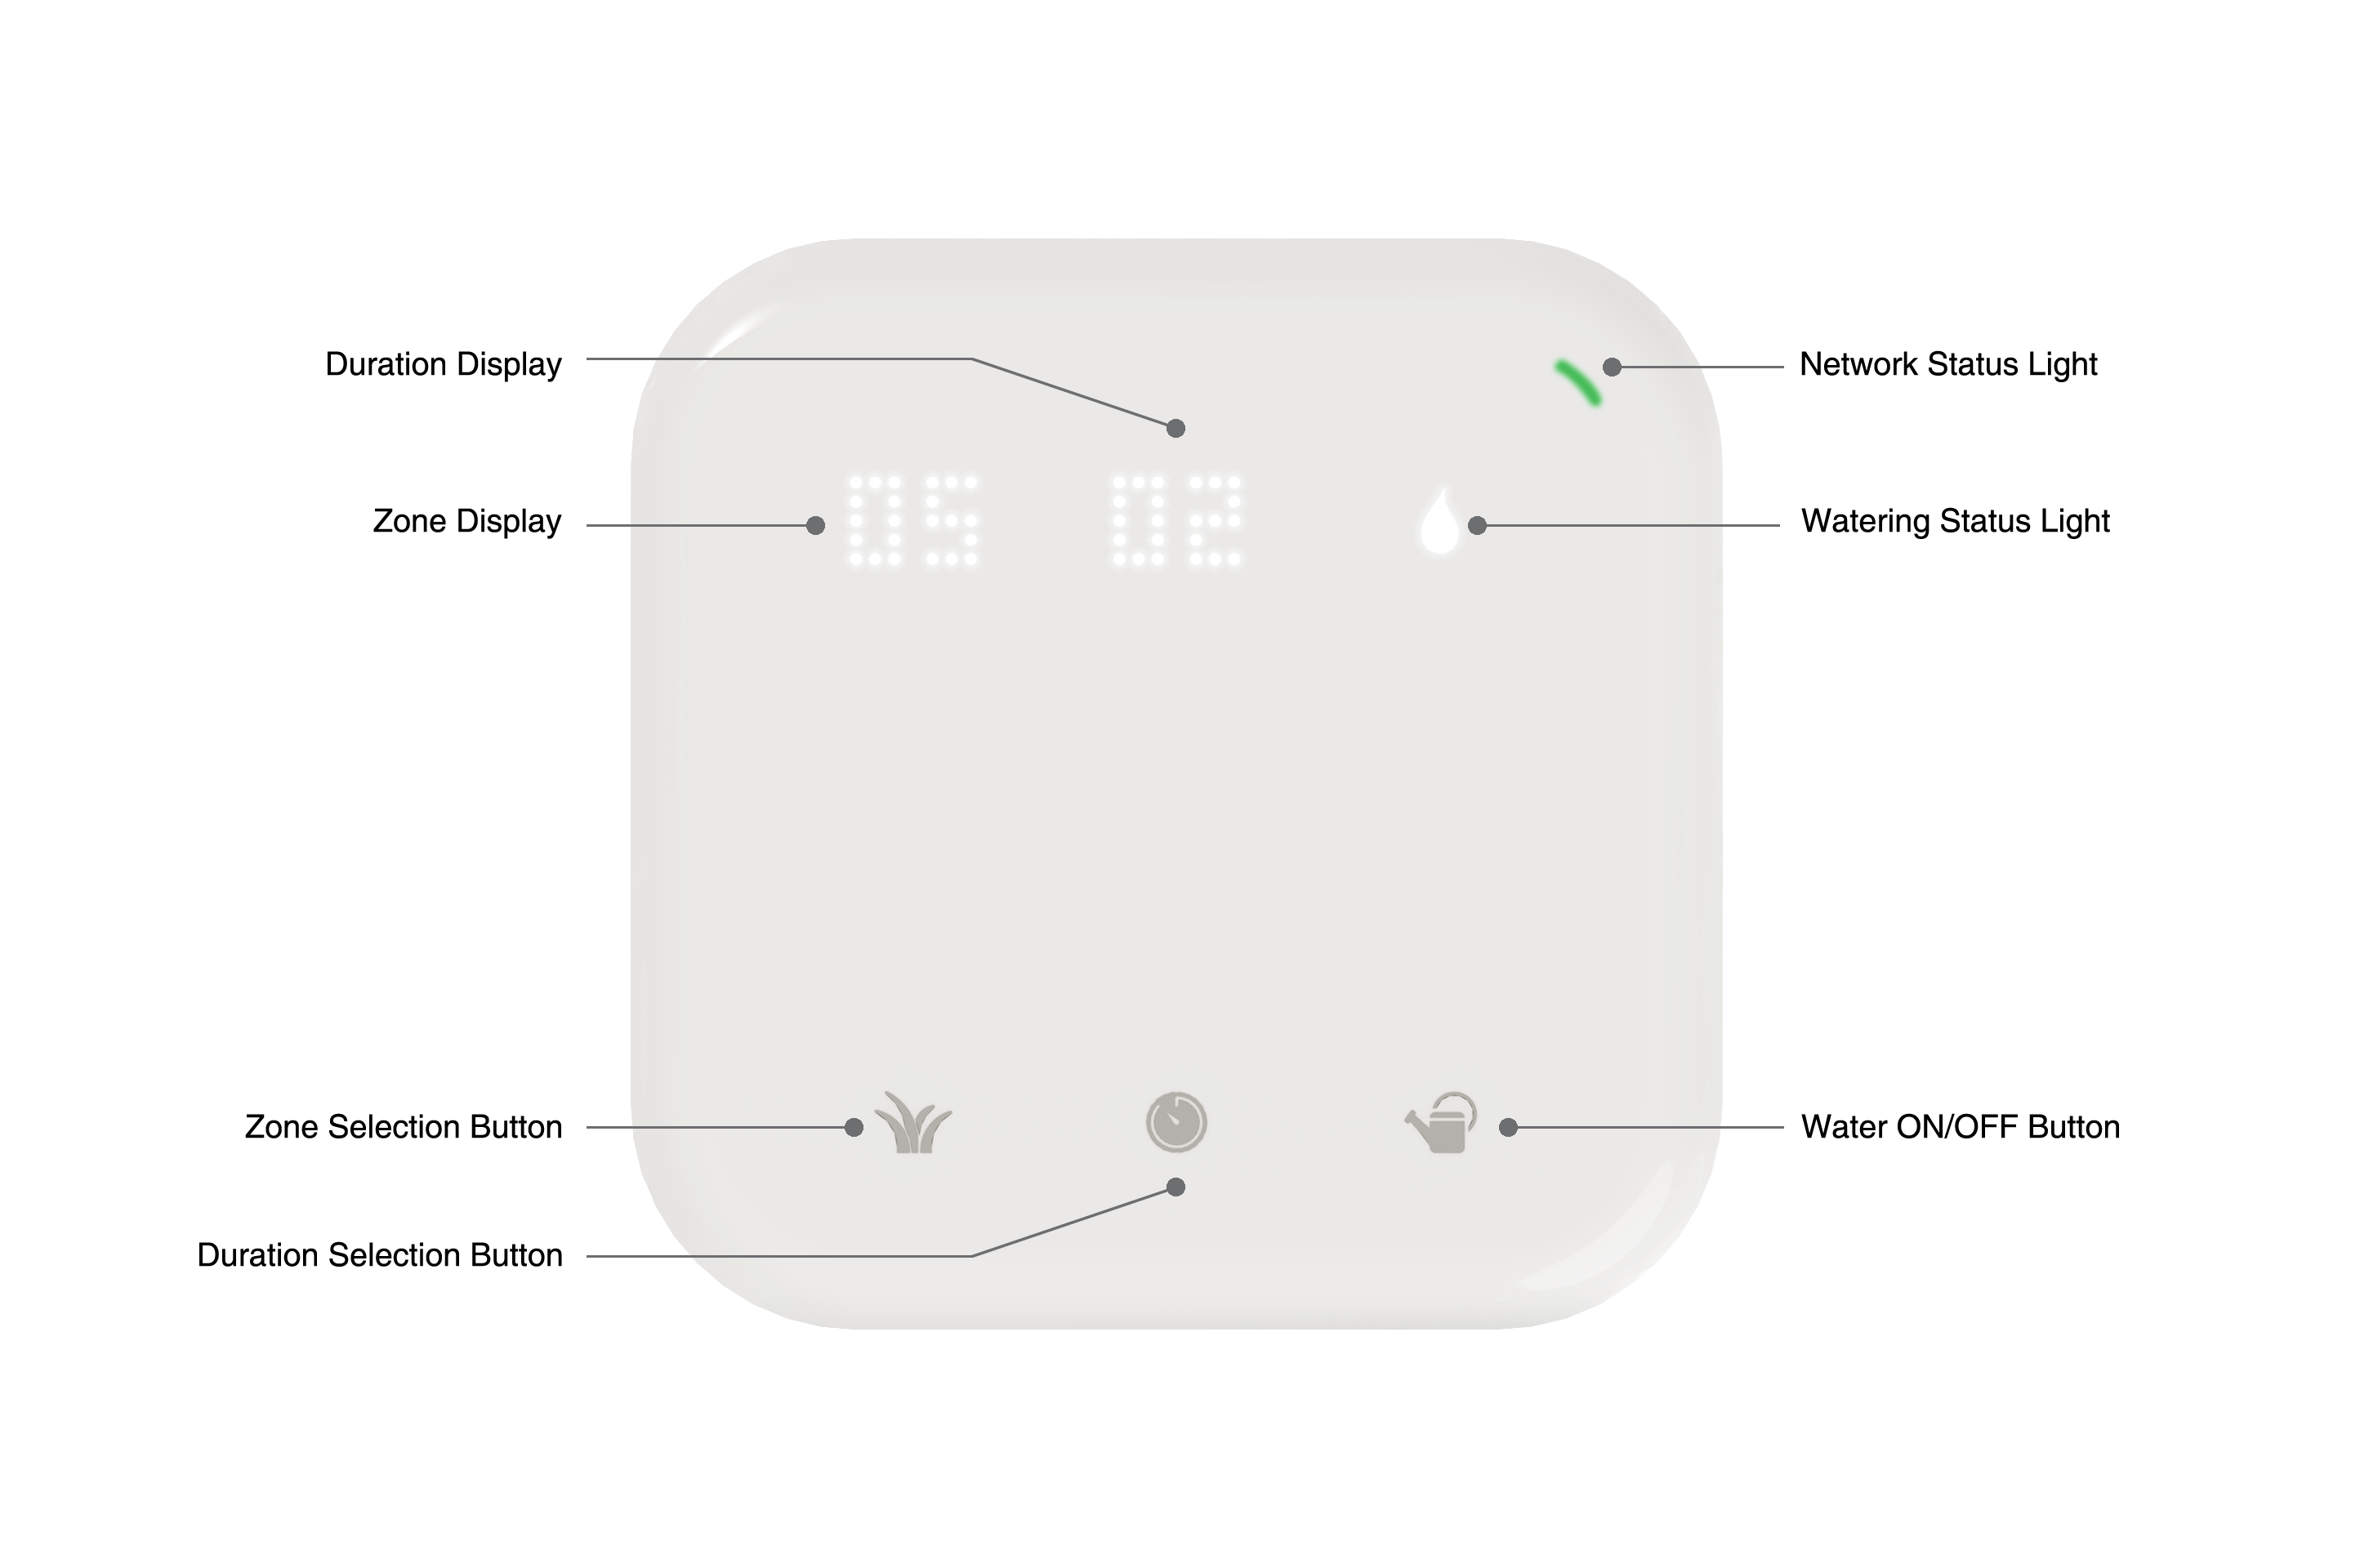 In the upper right corner of Netro Spark is a network status light. Netro Spark is touch control, and below it, there are three touch buttons: zone selection button, duration selection button and water ON/OFF button. On top of Netro Spark, there is the zone display, duration display and watering status light.